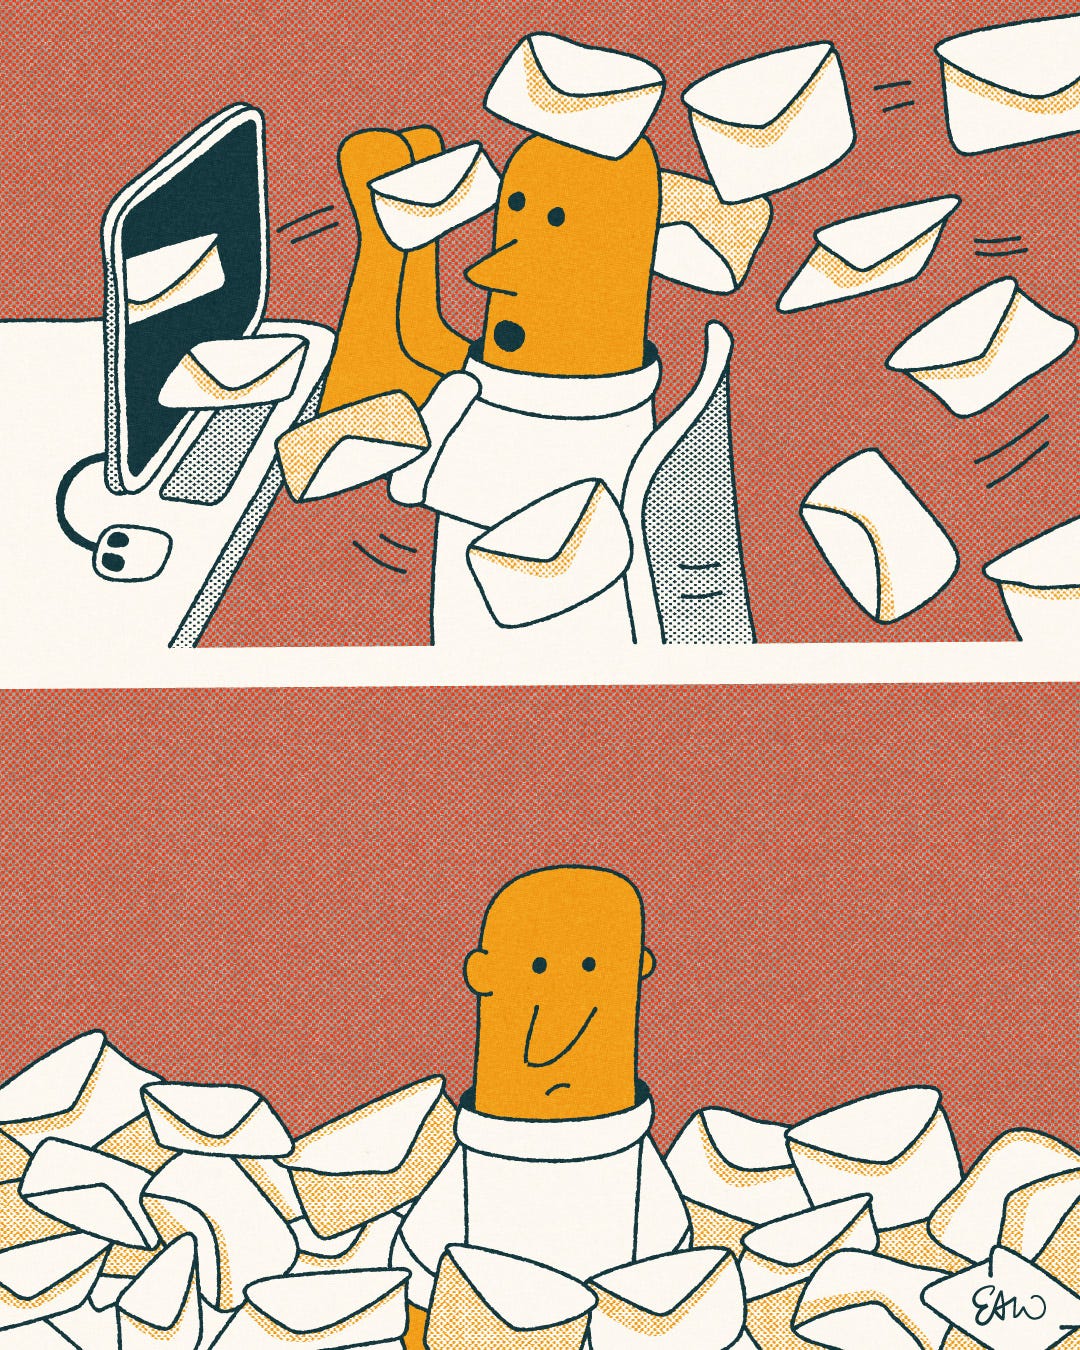 The remaining third and fourth panels of a comic drawn in a retro style. Multiple envelopes suggestive of email messages continue to fly out of the computer screen and hit the character sitting at their desk. The last panel has the character surrounded by a chest-deep pile of email.